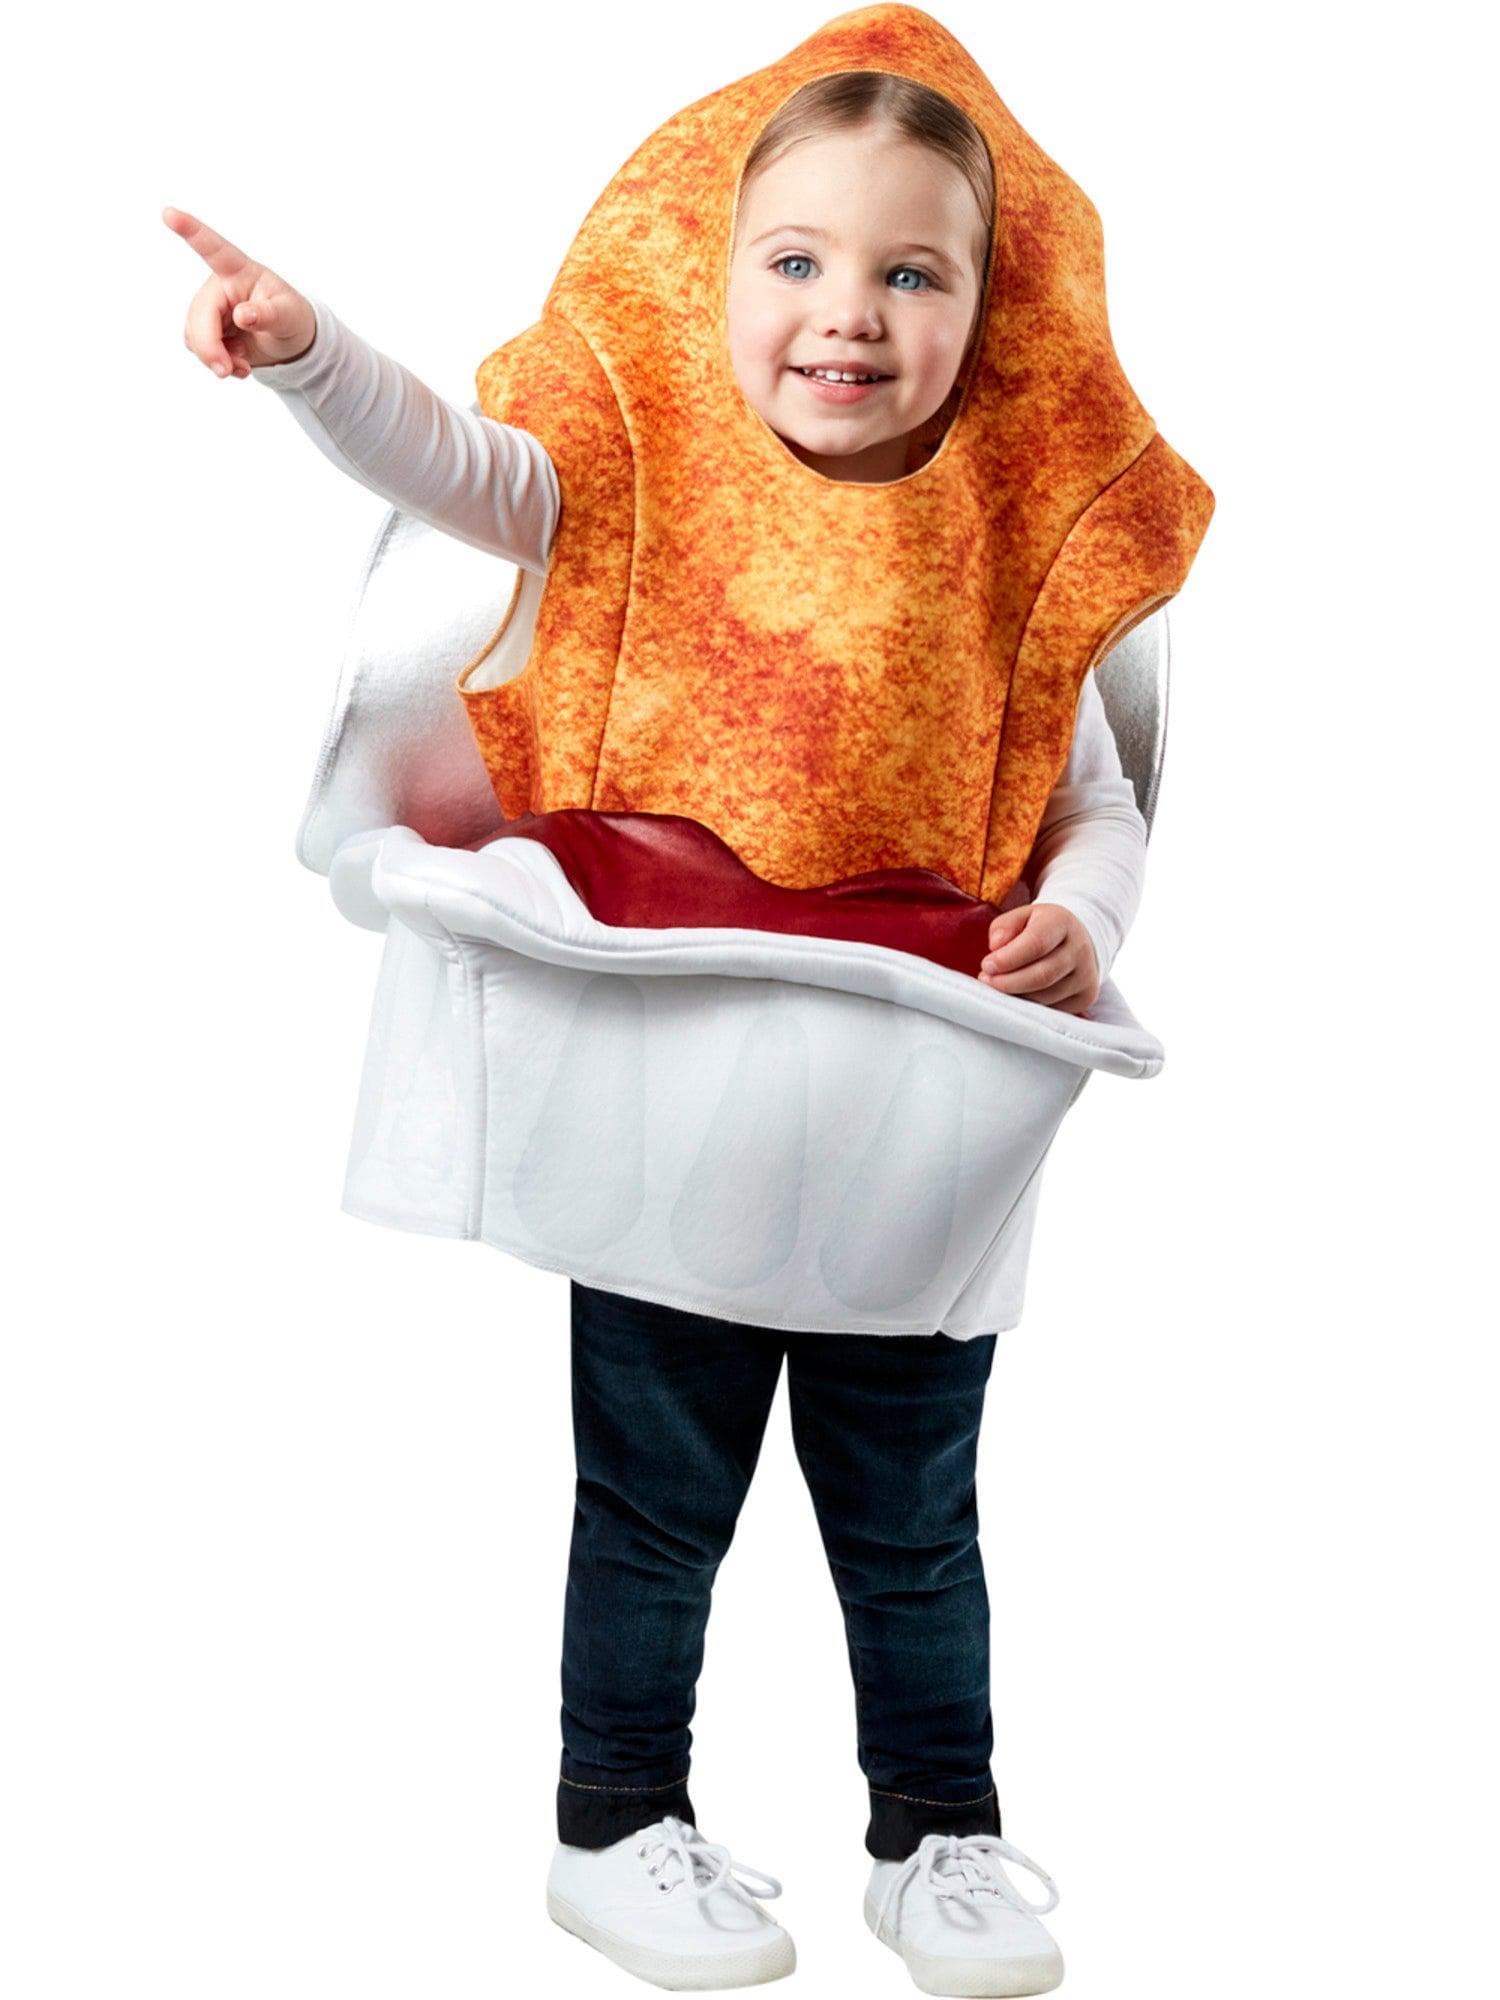 Little Nuggets Dip'N Sauce Toddler Costume - costumes.com